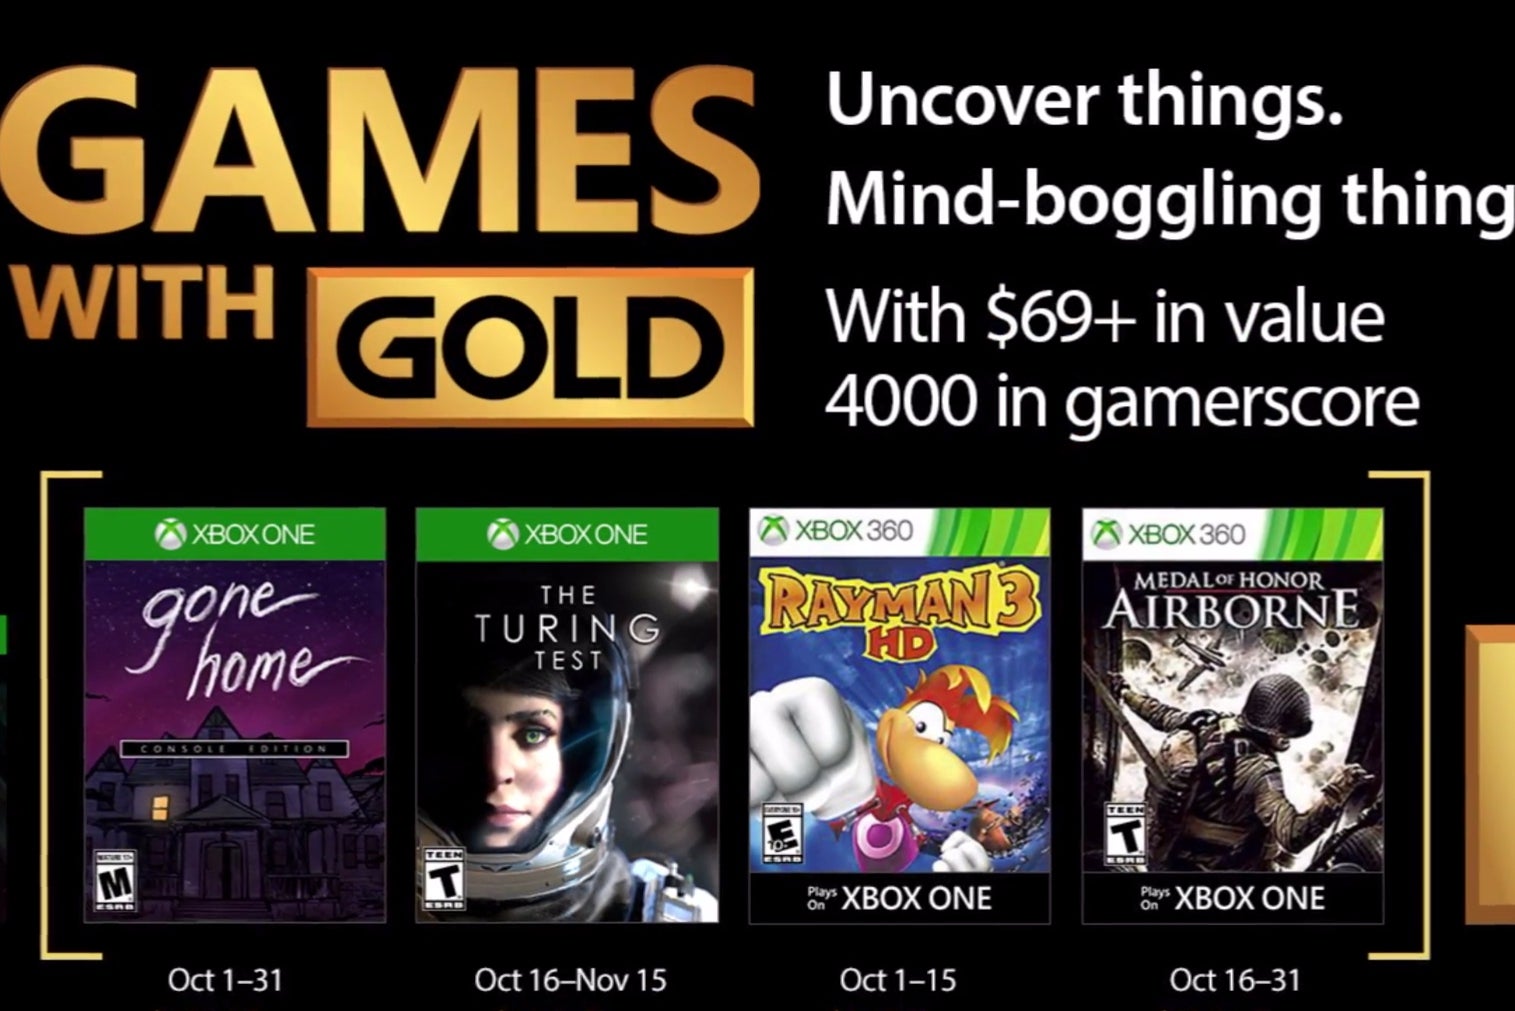 Image for Xbox Games with Gold October lineup includes Gone Home